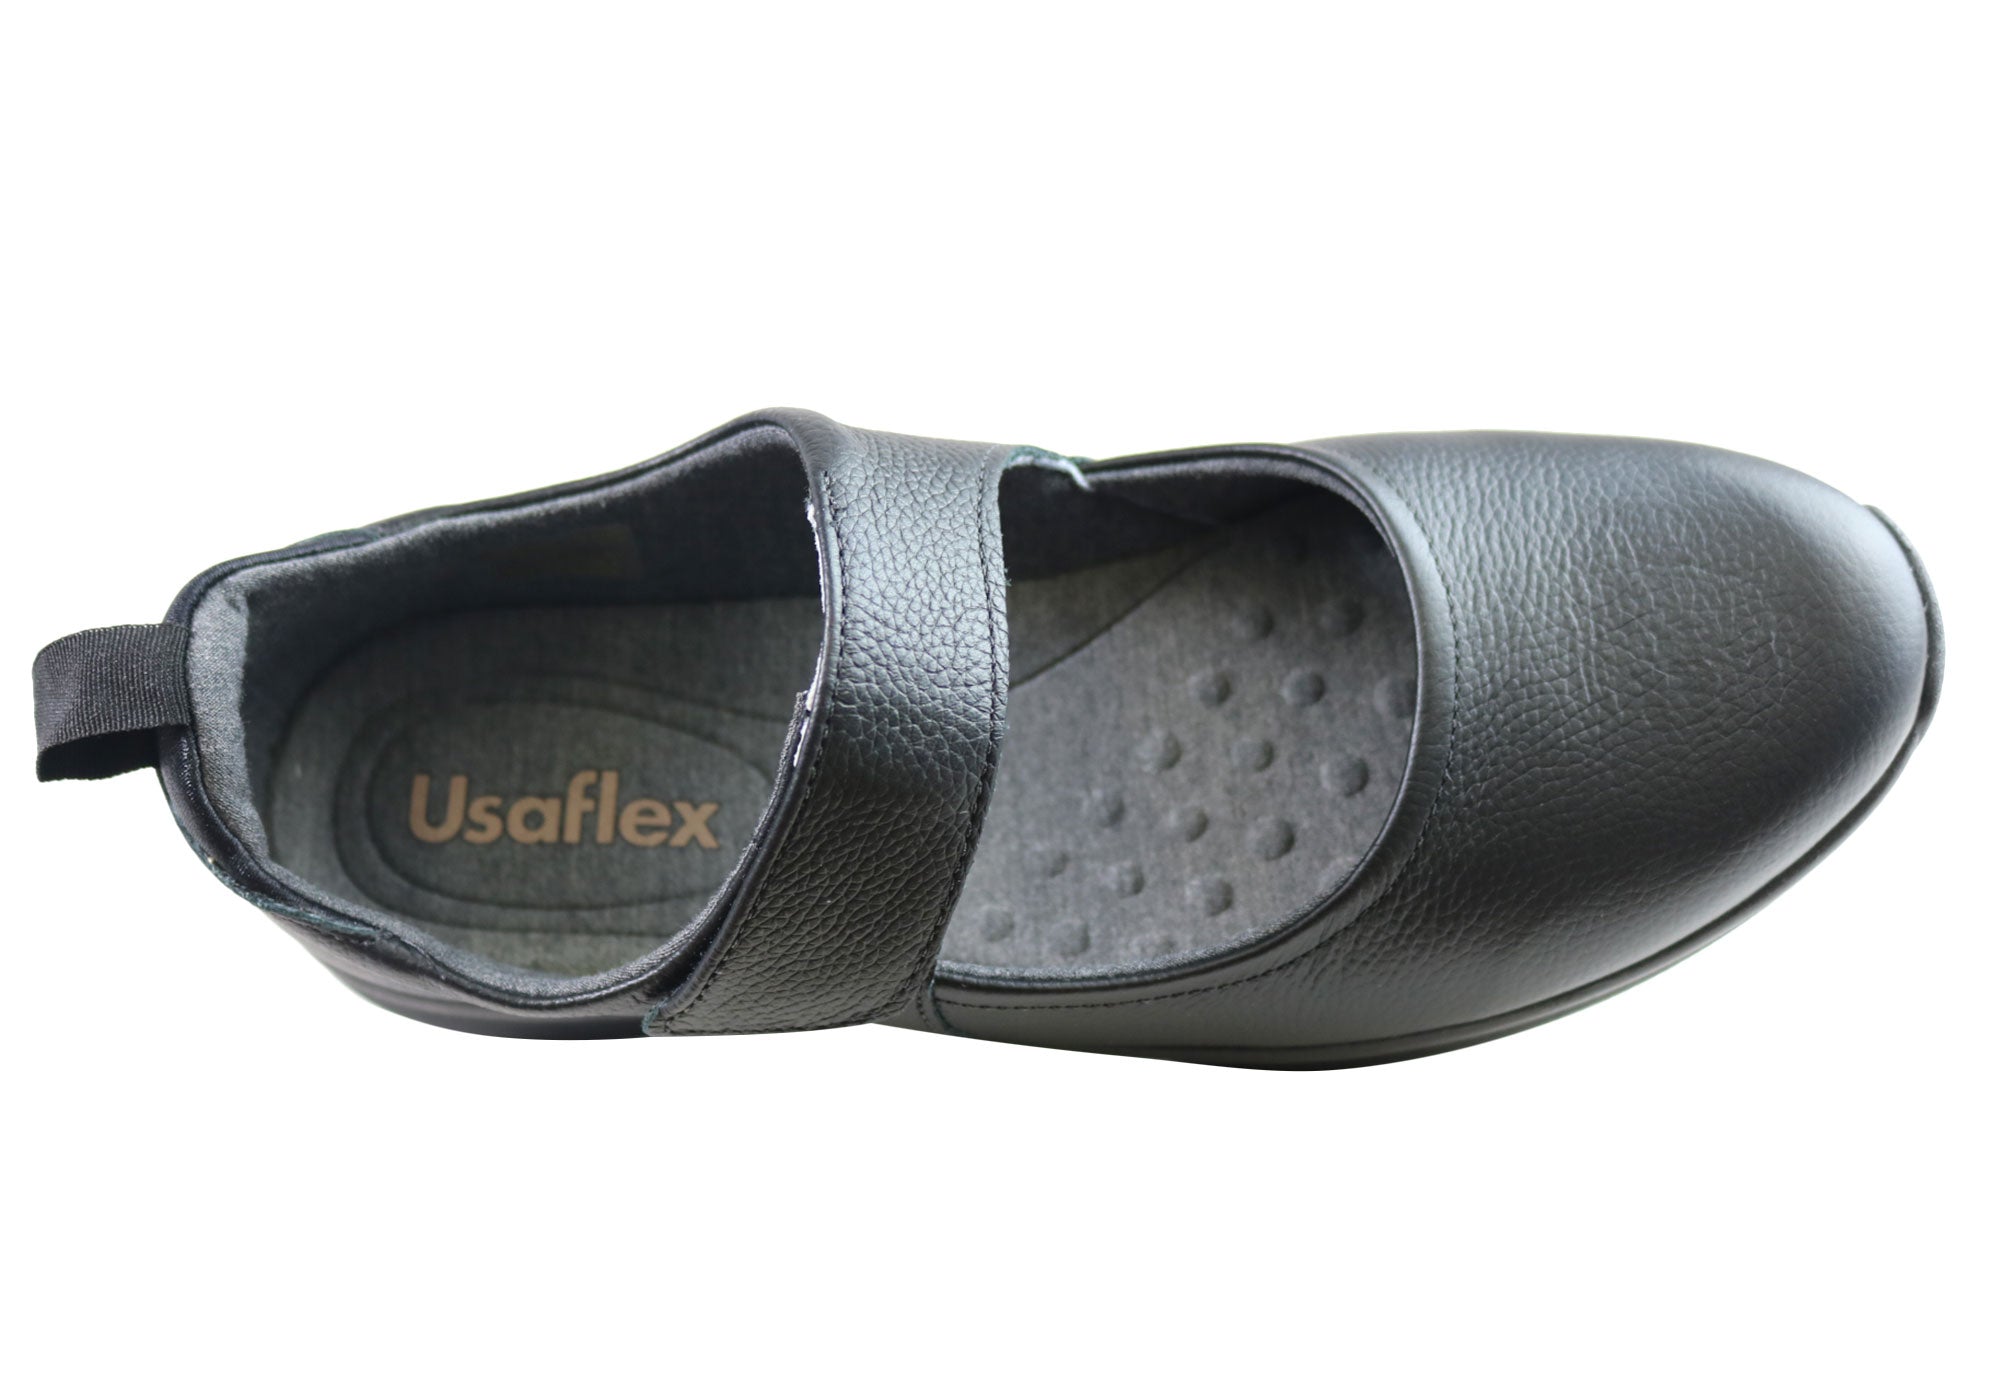 Usaflex Raelynn Womens Comfortable Leather Shoes Made In Brazil